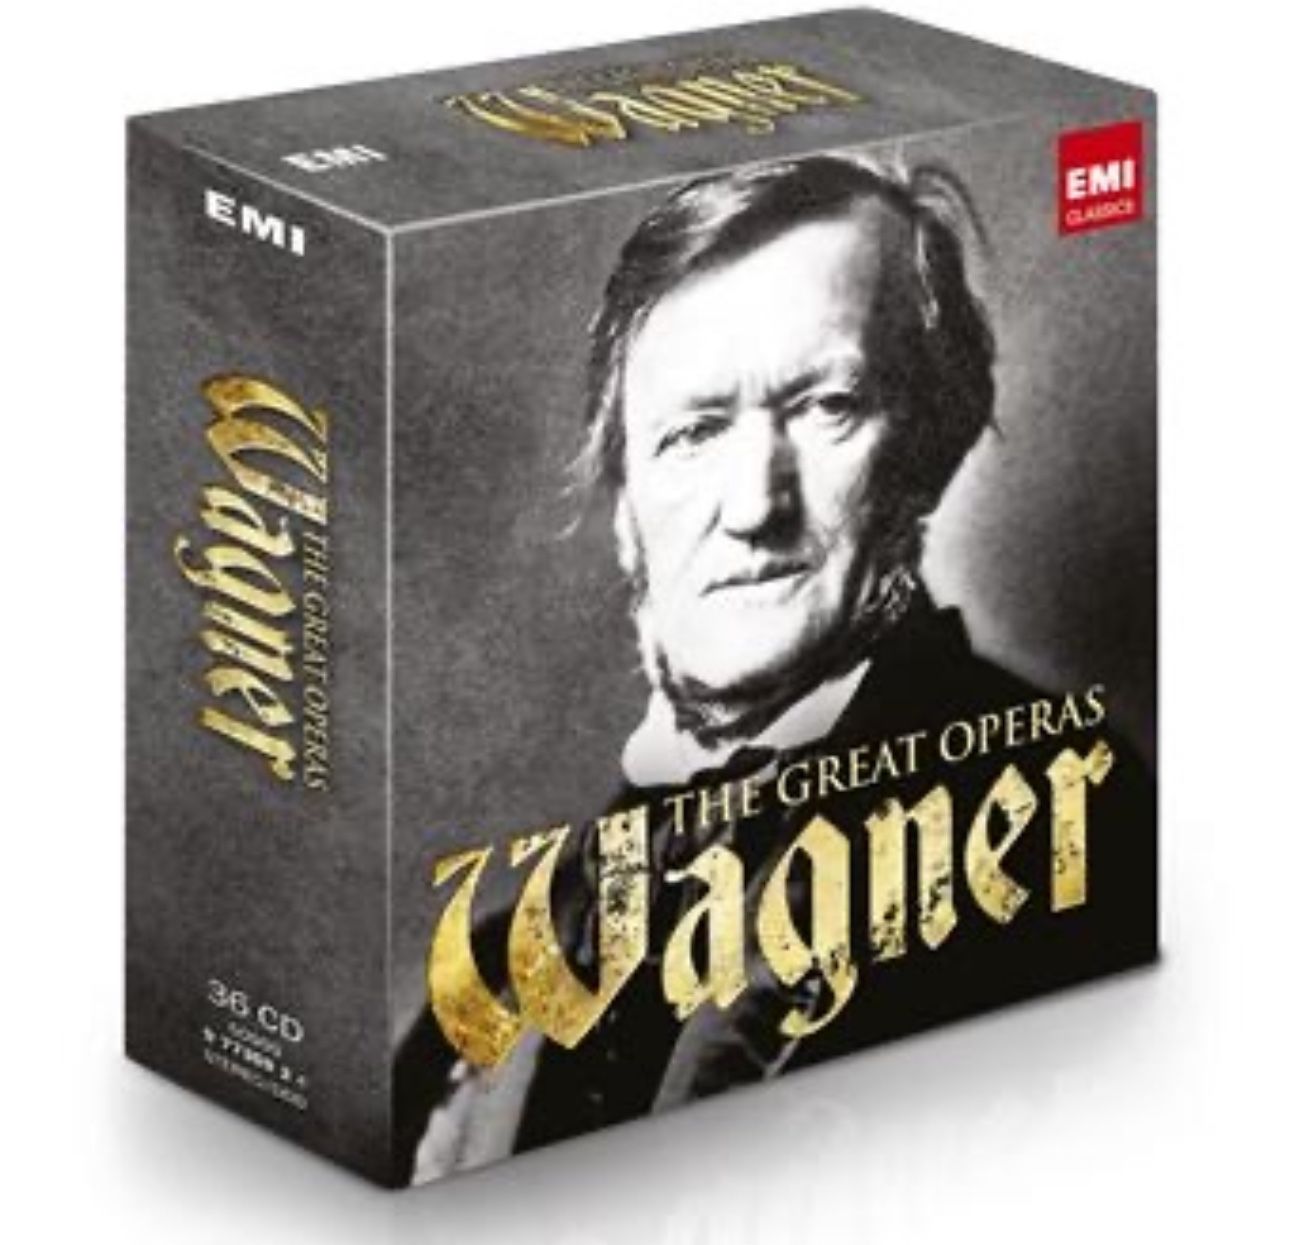 WAGNER The Great Operas 36 CDs box Hollander Tannhauser Lohengrin Parsifal Ring 5.0 New Sealed